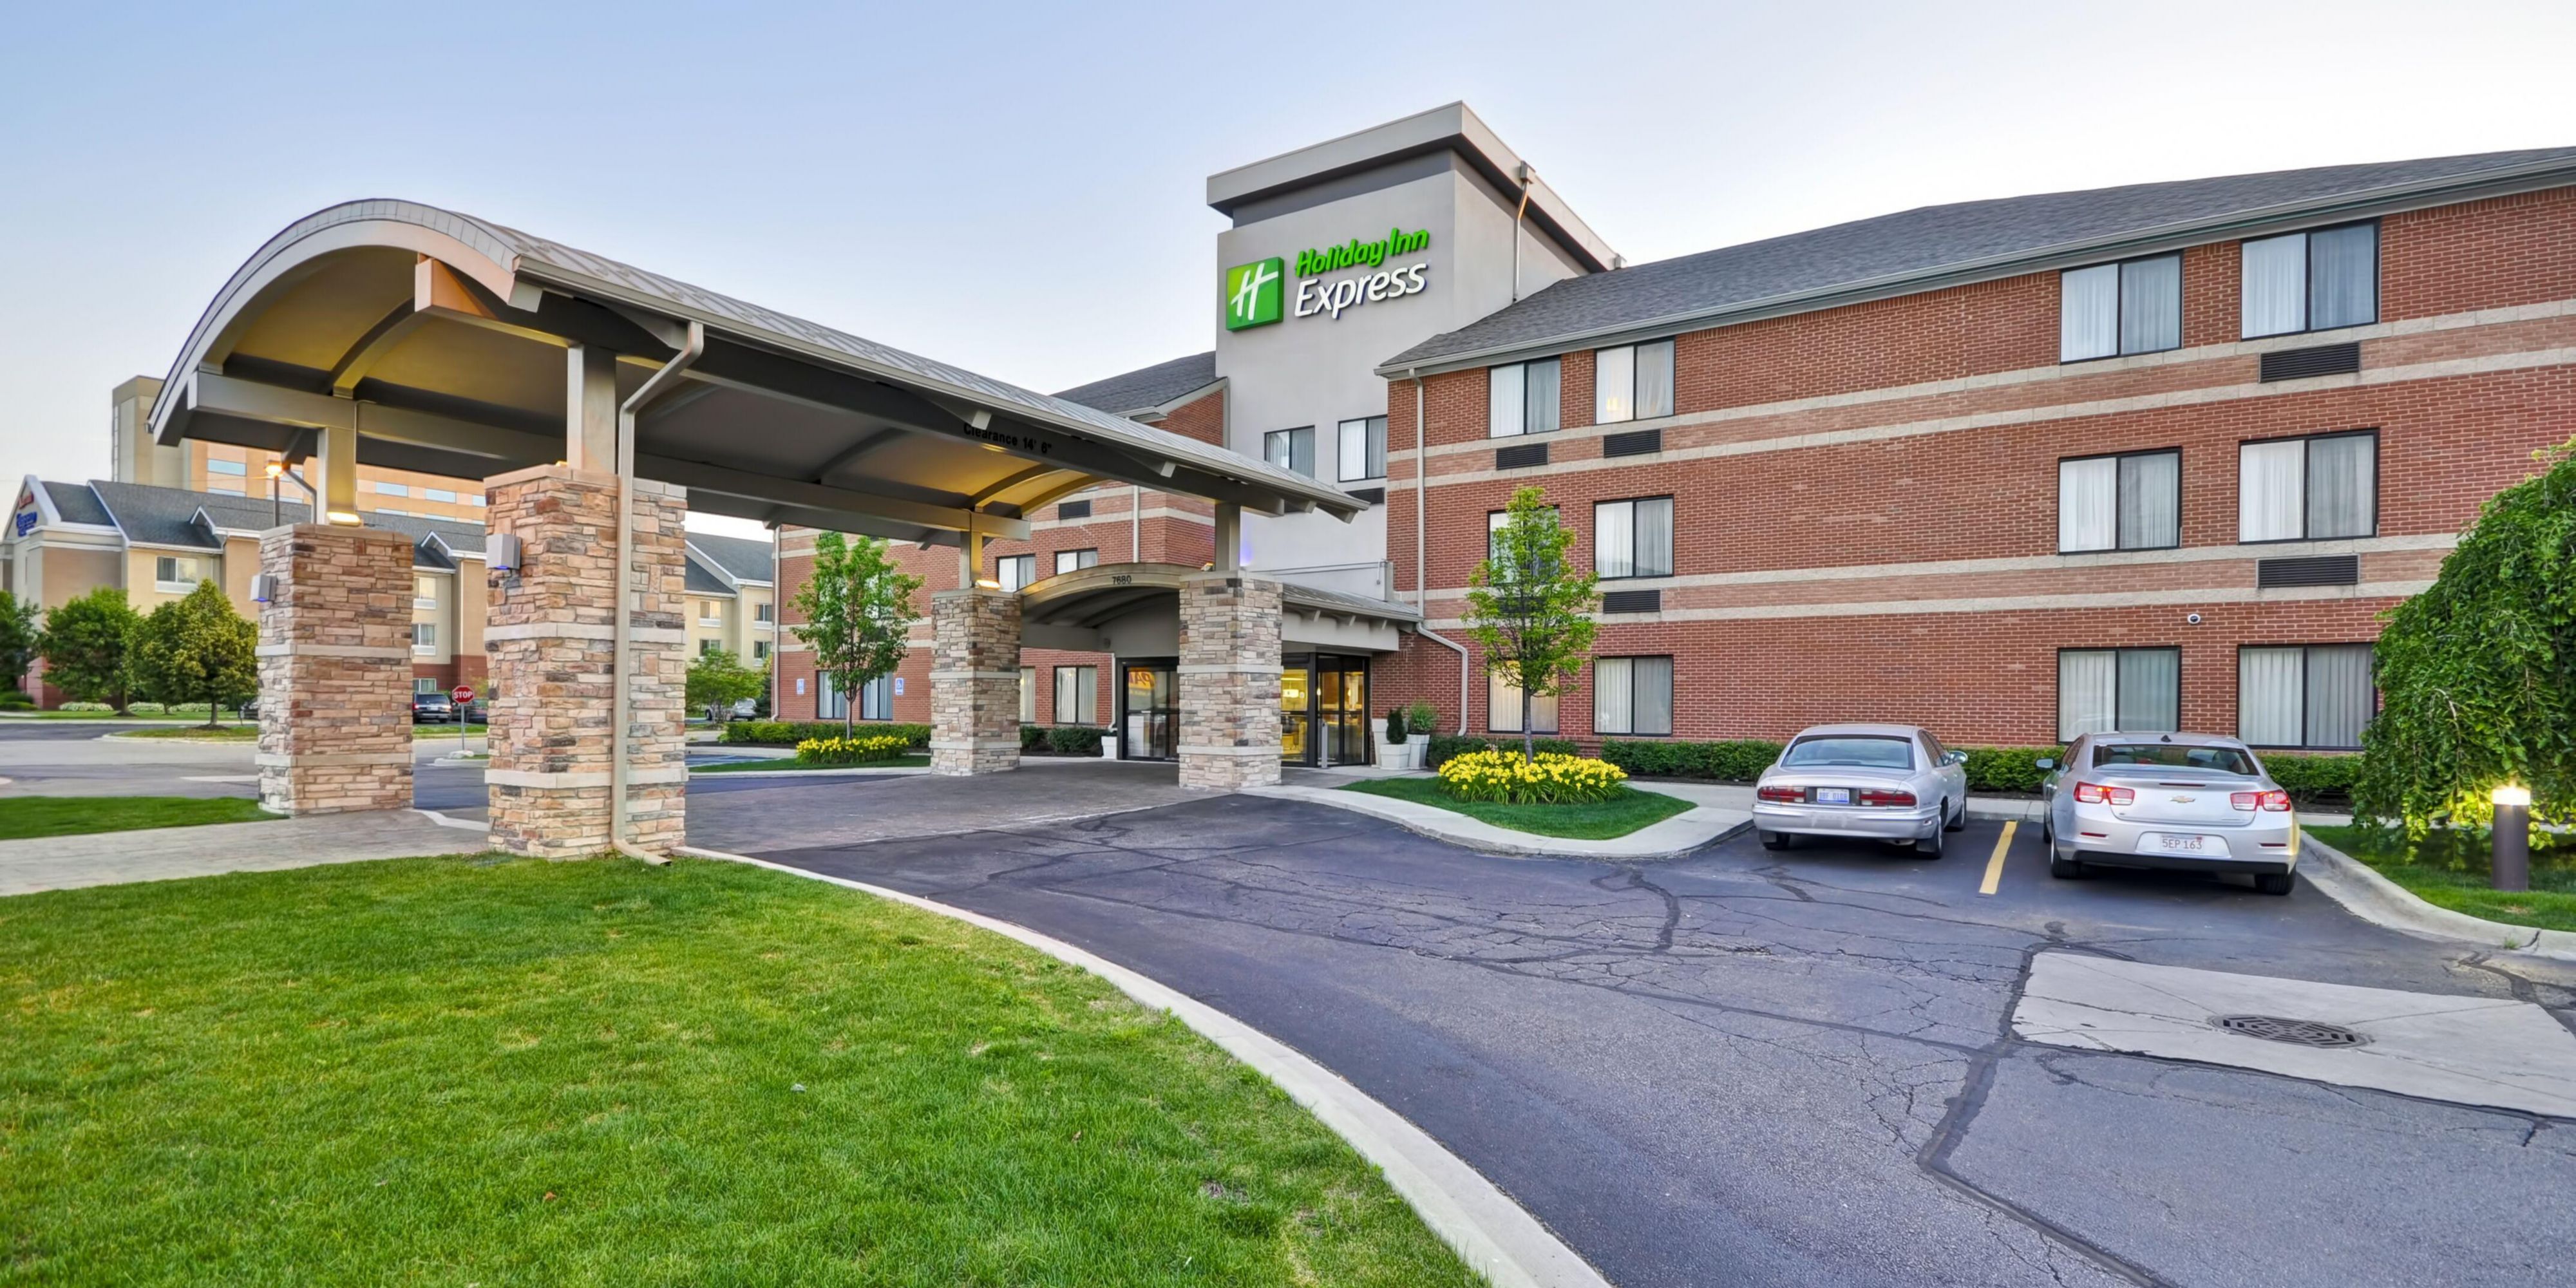 Stay at our hotel near DTW for one night and park your car for longer with one of our parking packages. Vehicles are securely parked at Qwik Park, located right behind our hotel in Romulus, Michigan.